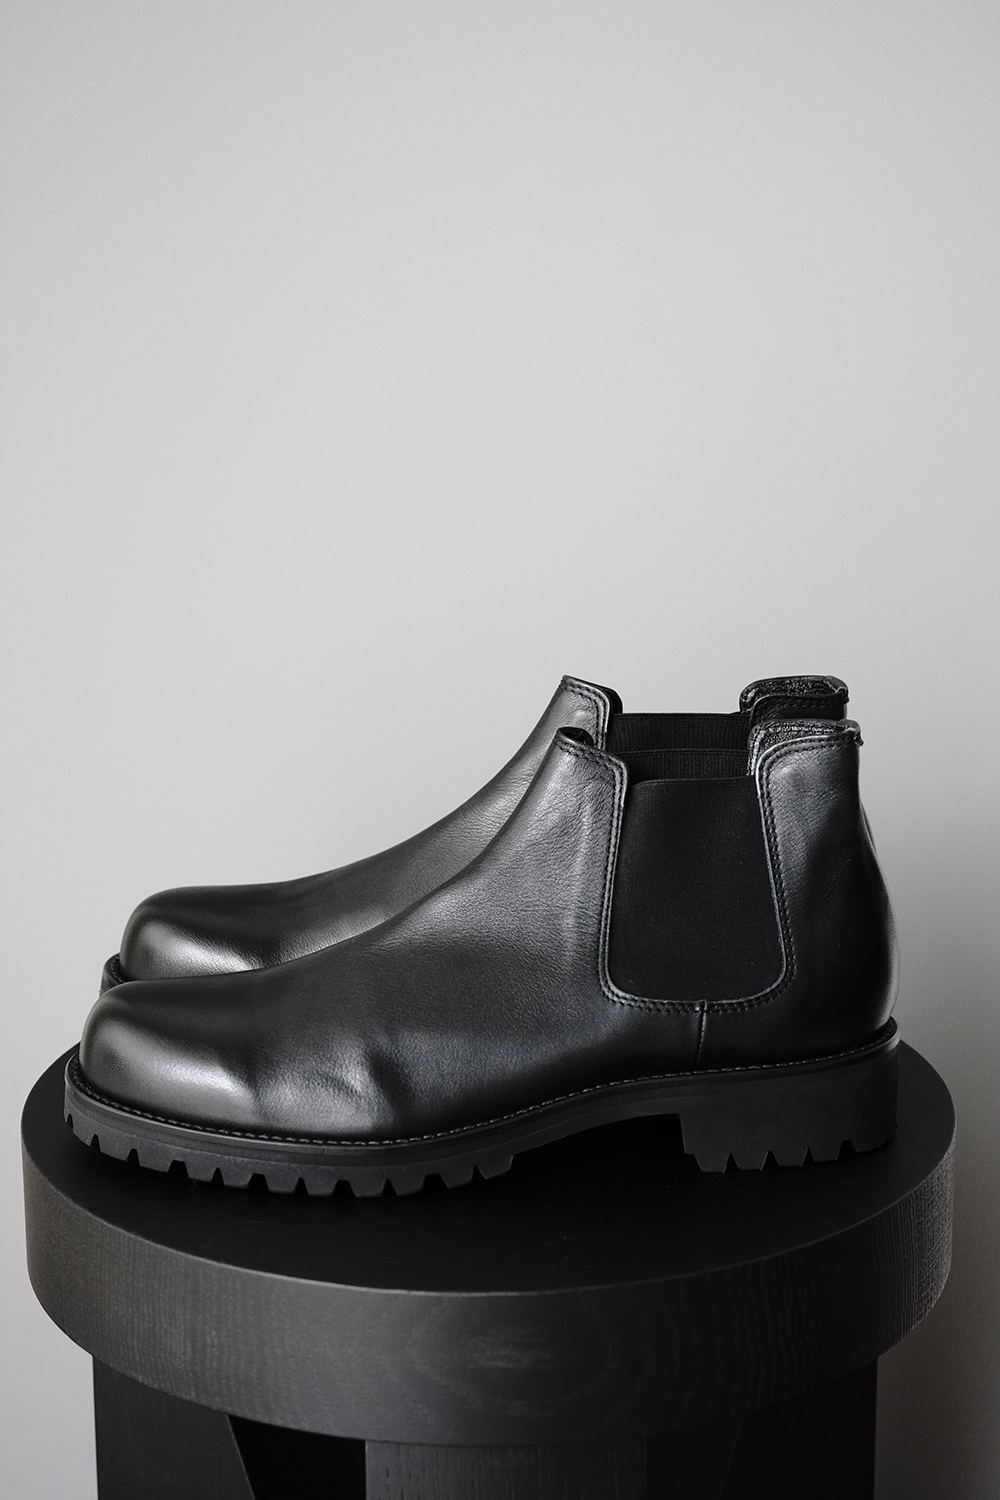 SIDE GORE BOOTS (WATER PROOF LEATHER)　